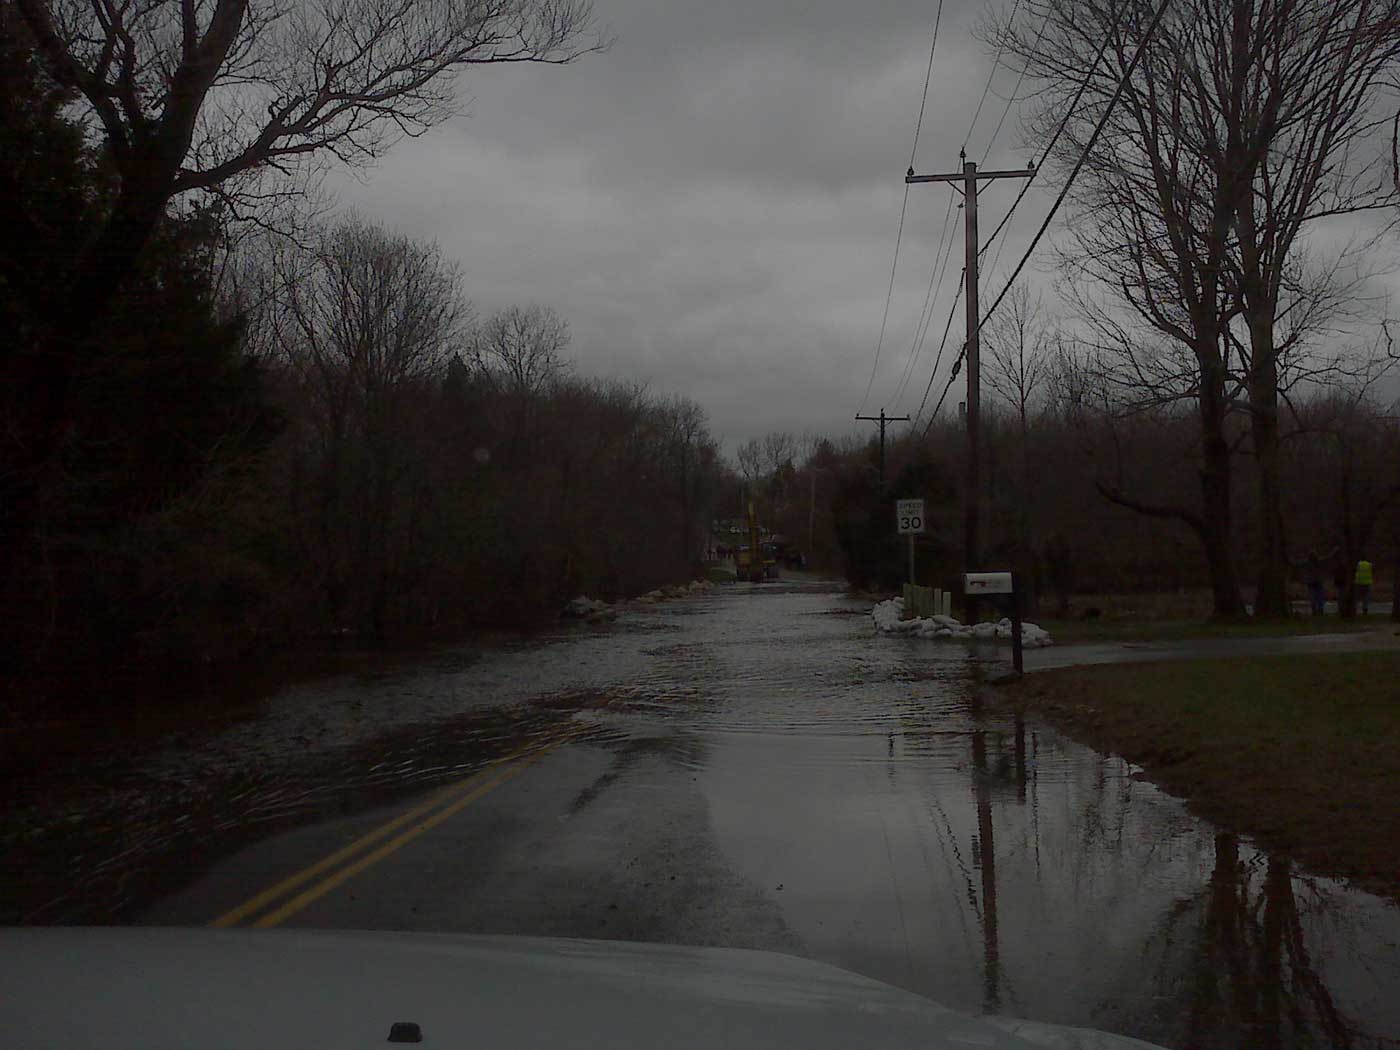 Flooded road